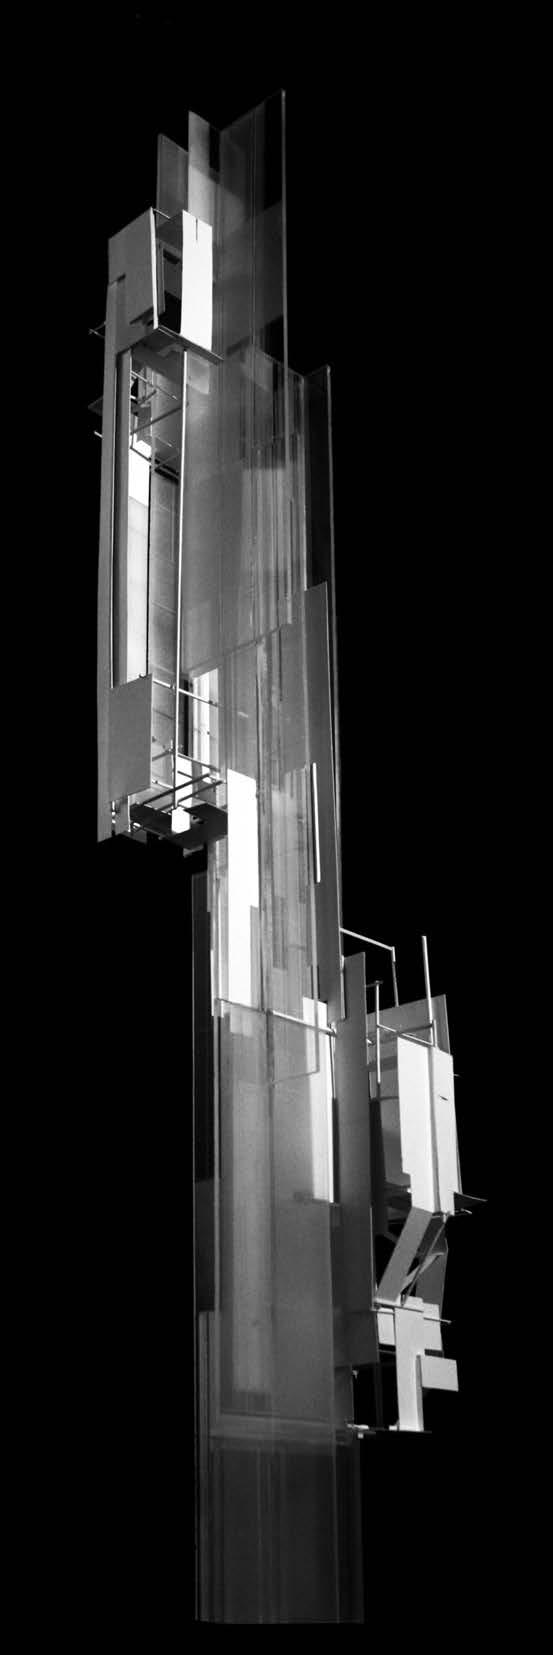 Spring 2012 The vertical datum project focuses on creating a headquarters for Cirque du Soleil within a tower typology.